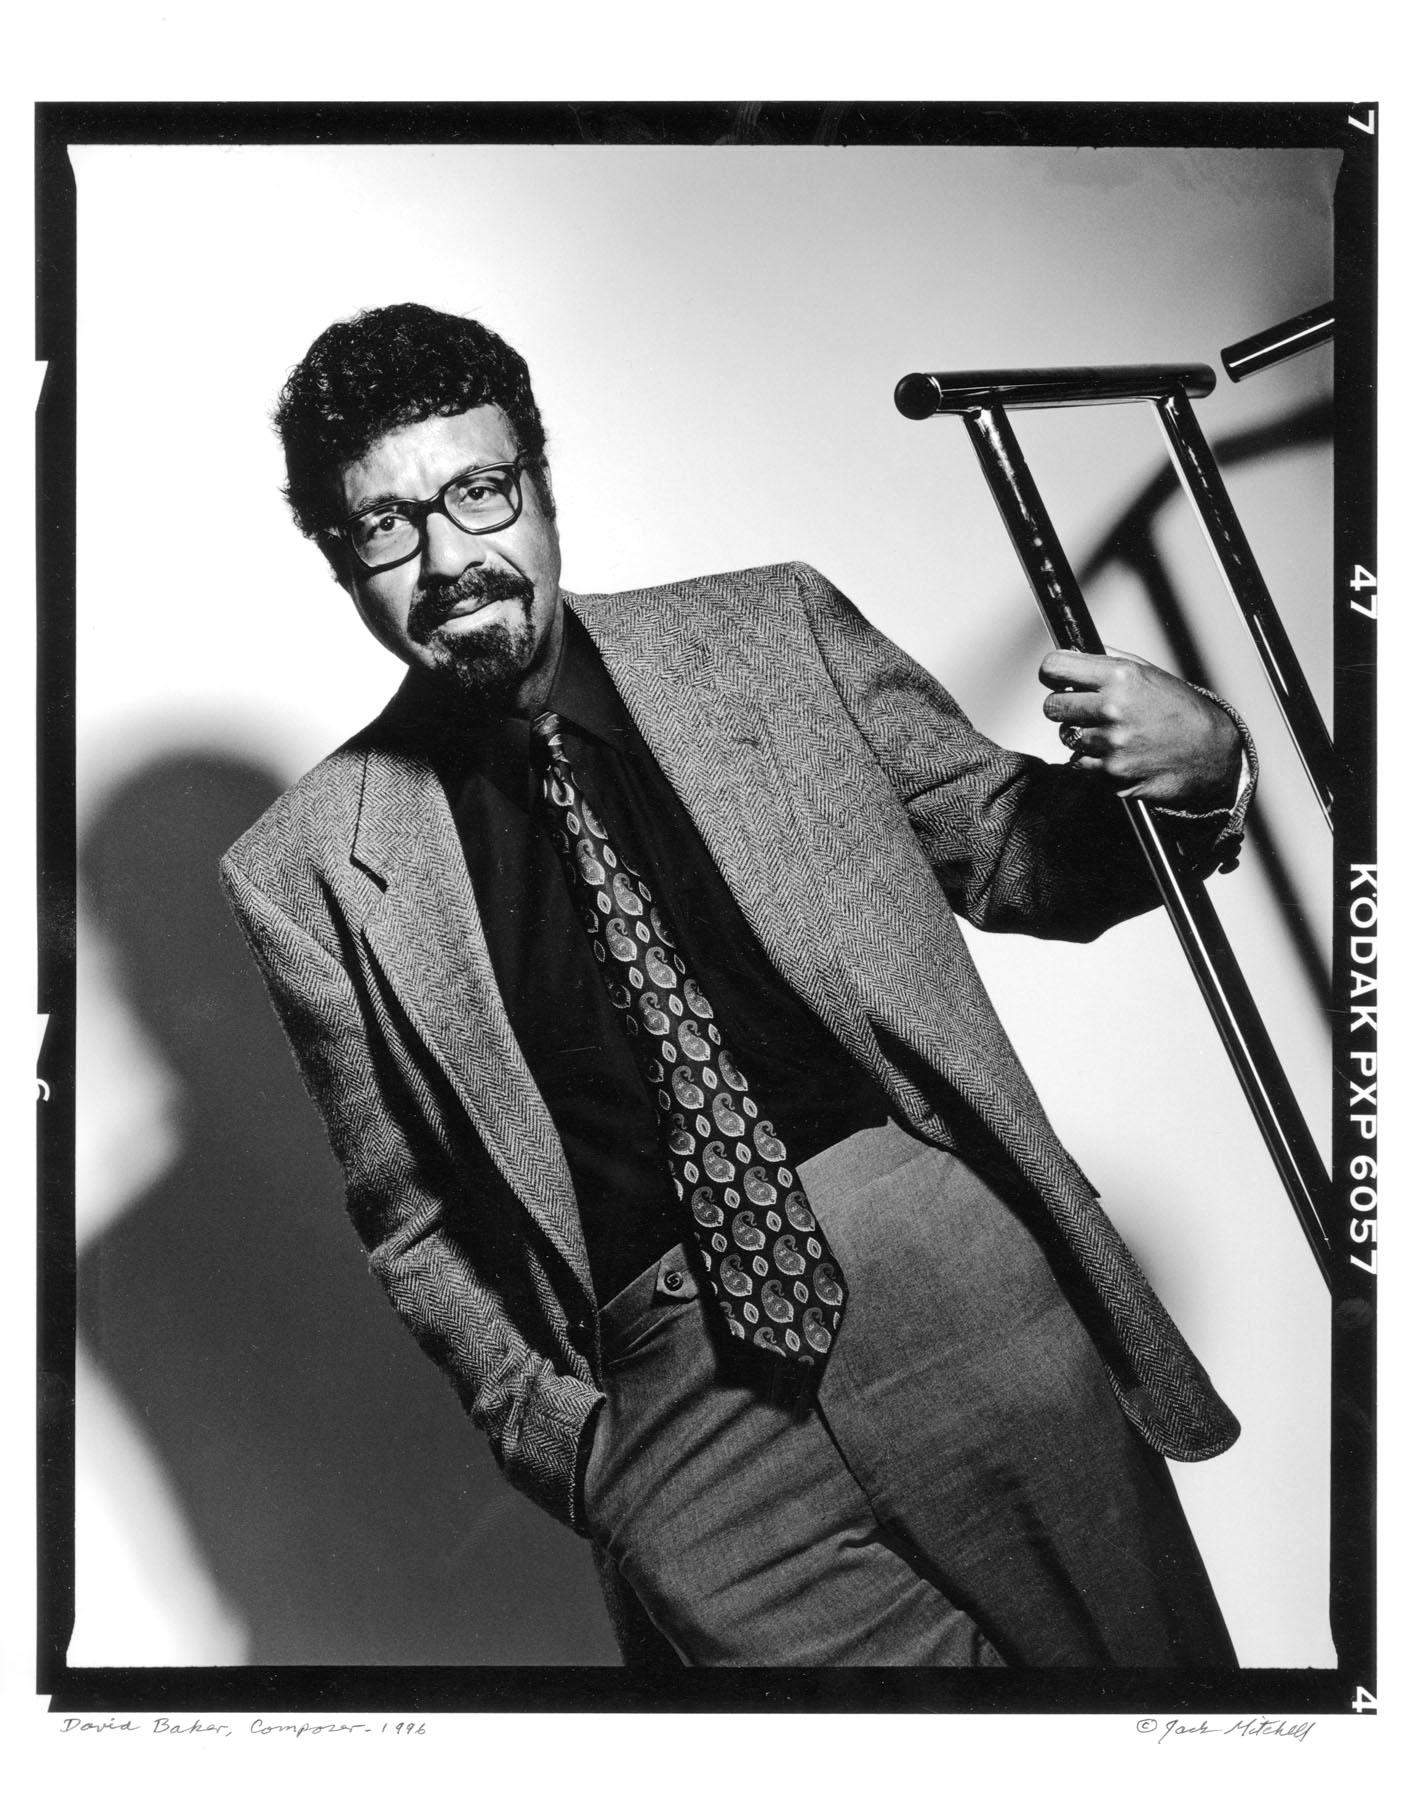 Jack Mitchell Black and White Photograph - African American jazz composer, conductor, and musician David Baker, signed 